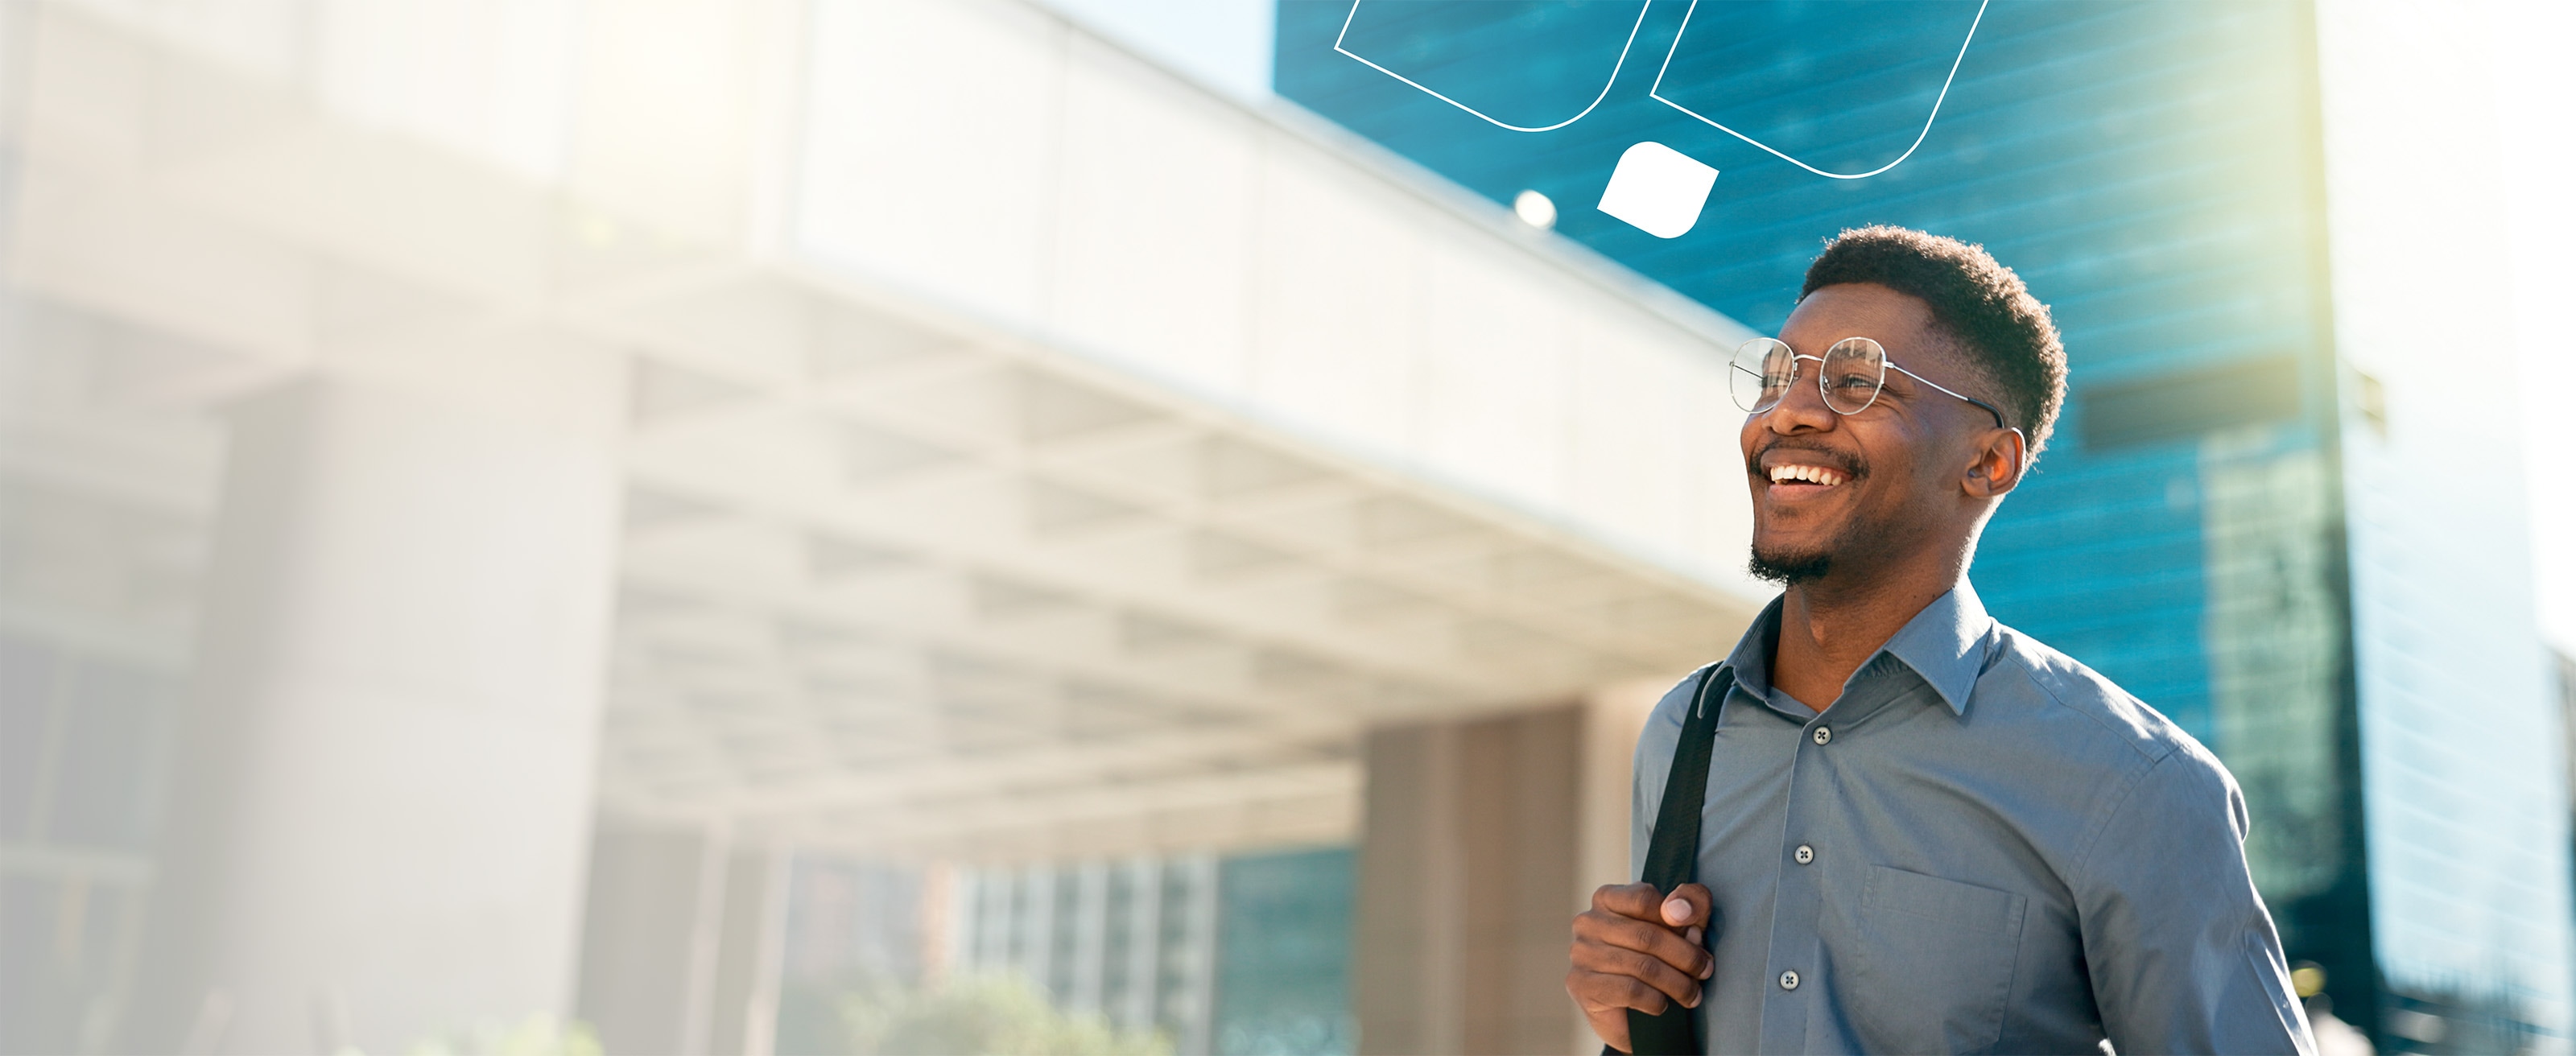 Demonstrate your expertise in enterprise infrastructure, assurance, security, and more. Configure, troubleshoot, and manage the networks of the largest companies in the world with the Cisco Certified Network Professional (CCNP) Enterprise certification.